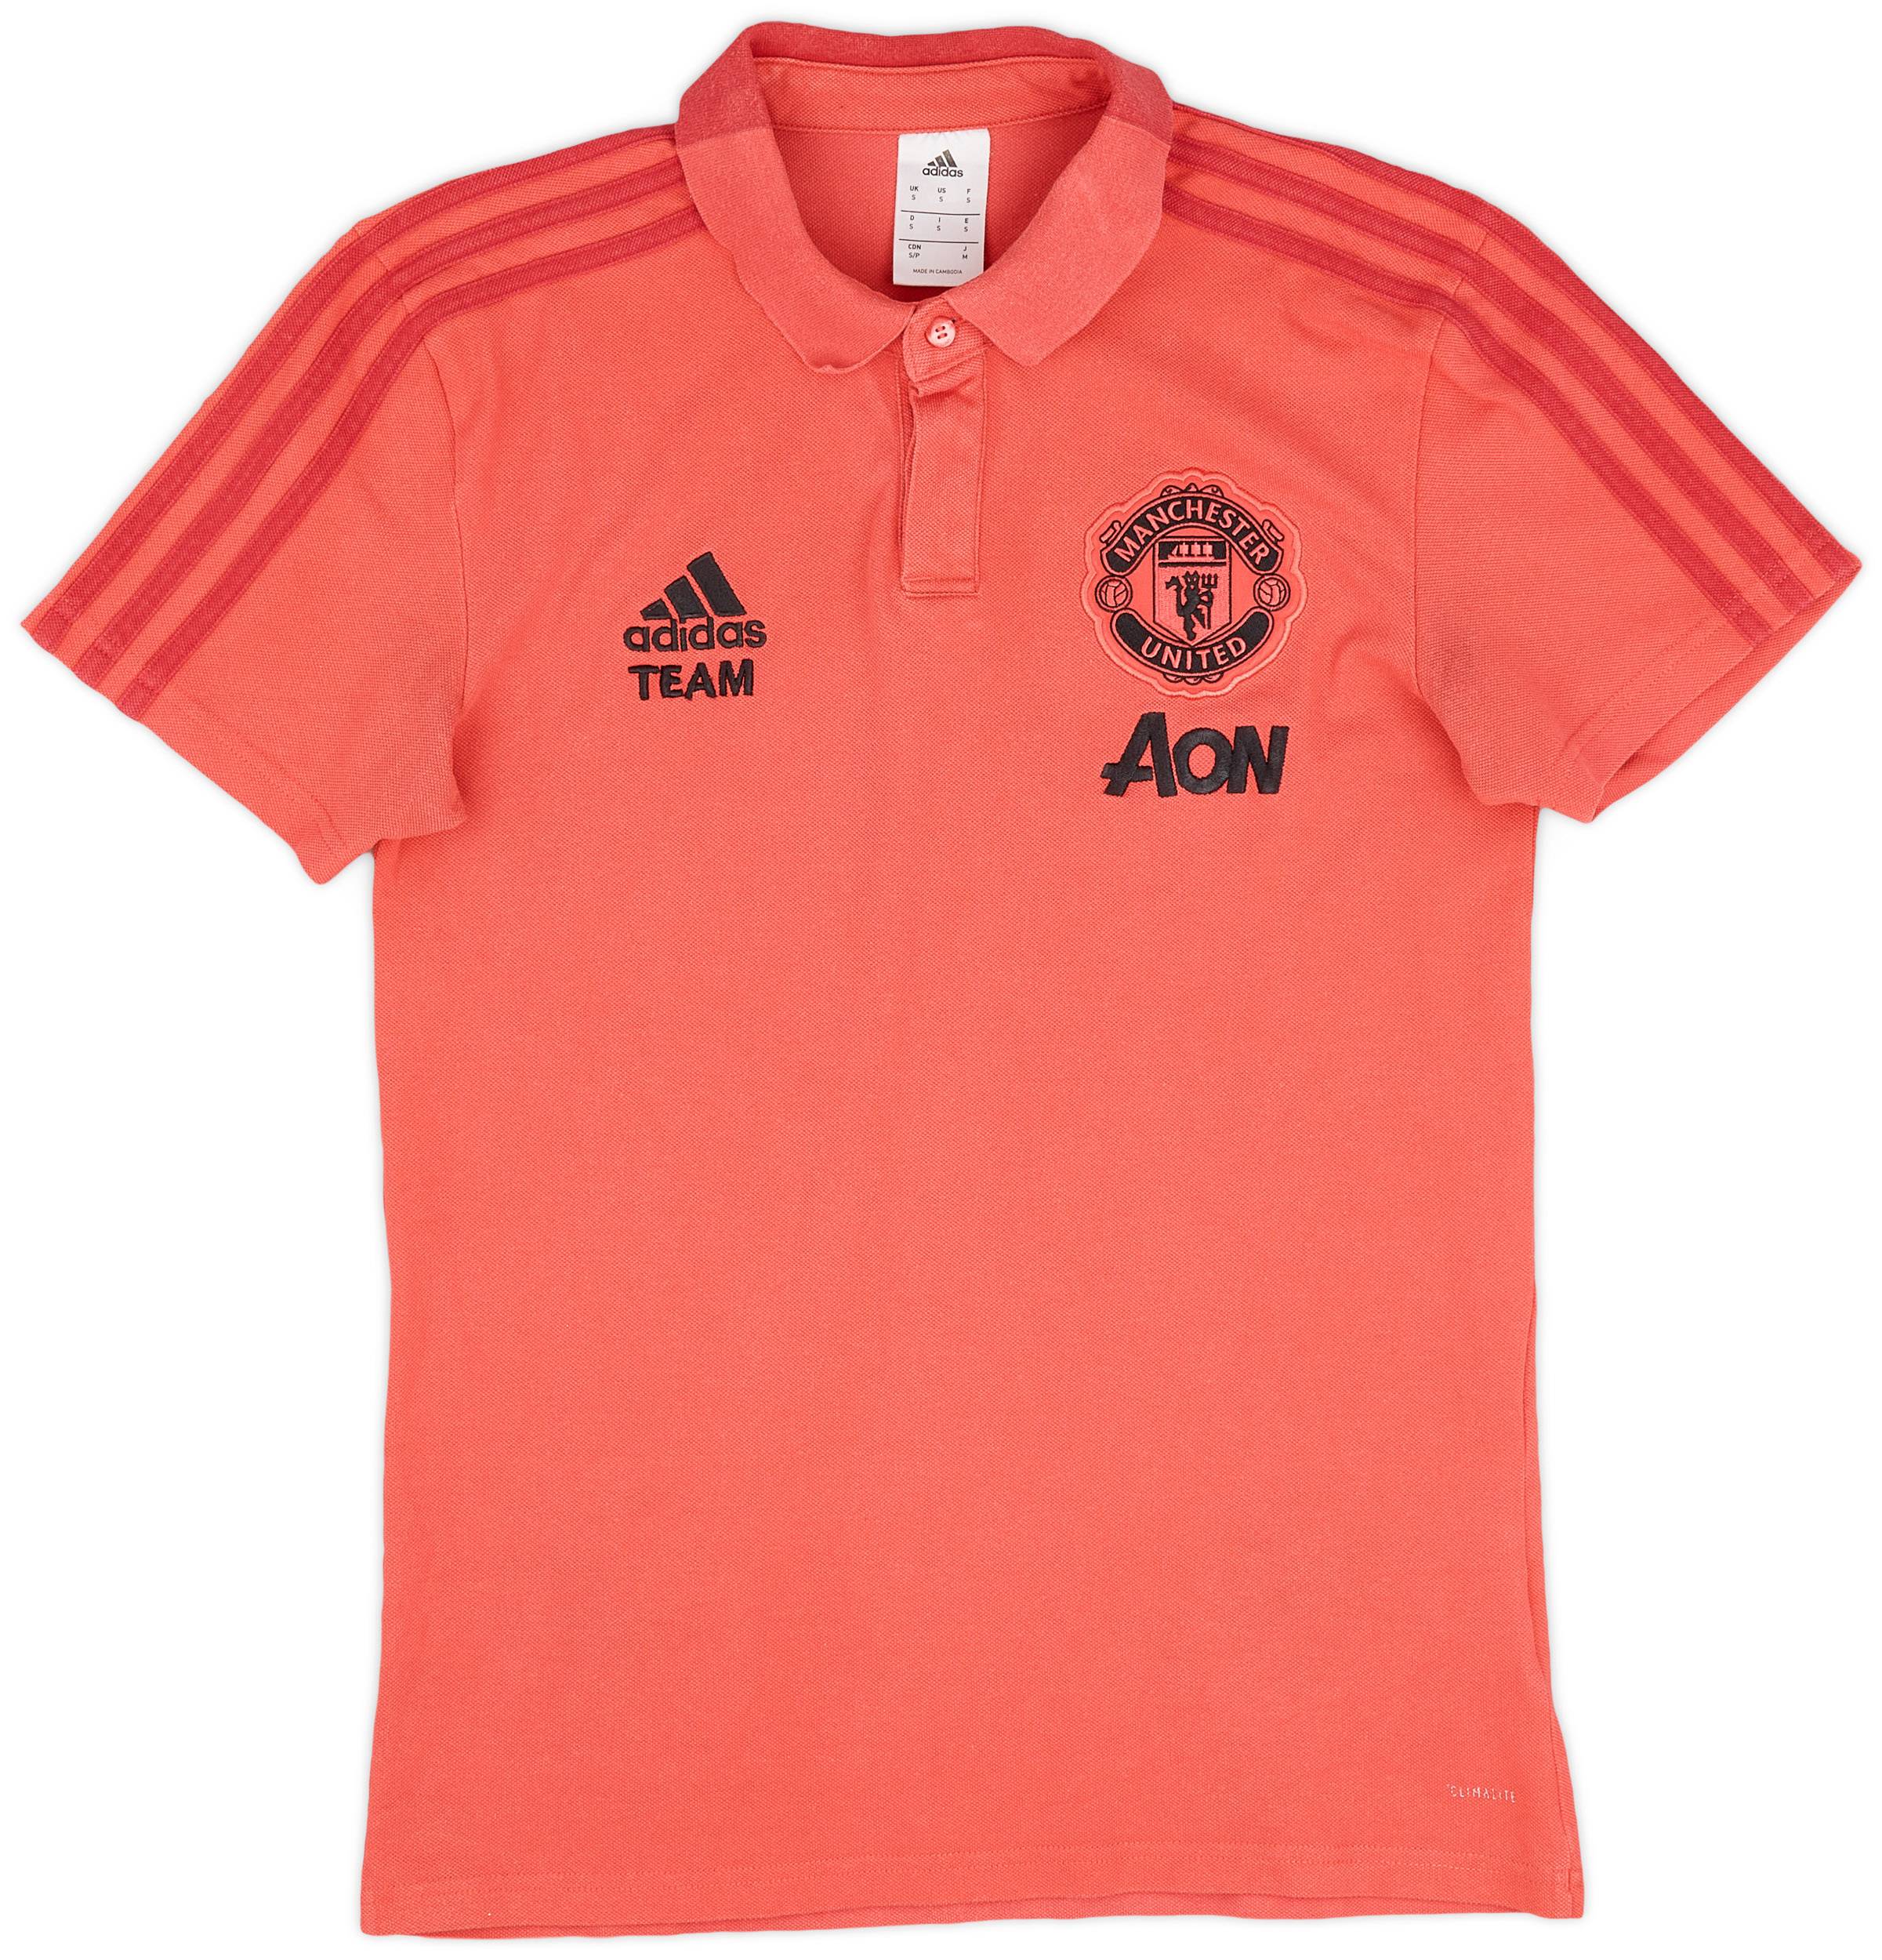 2018-19 Manchester United adidas Polo Shirt - 9/10 - (S)